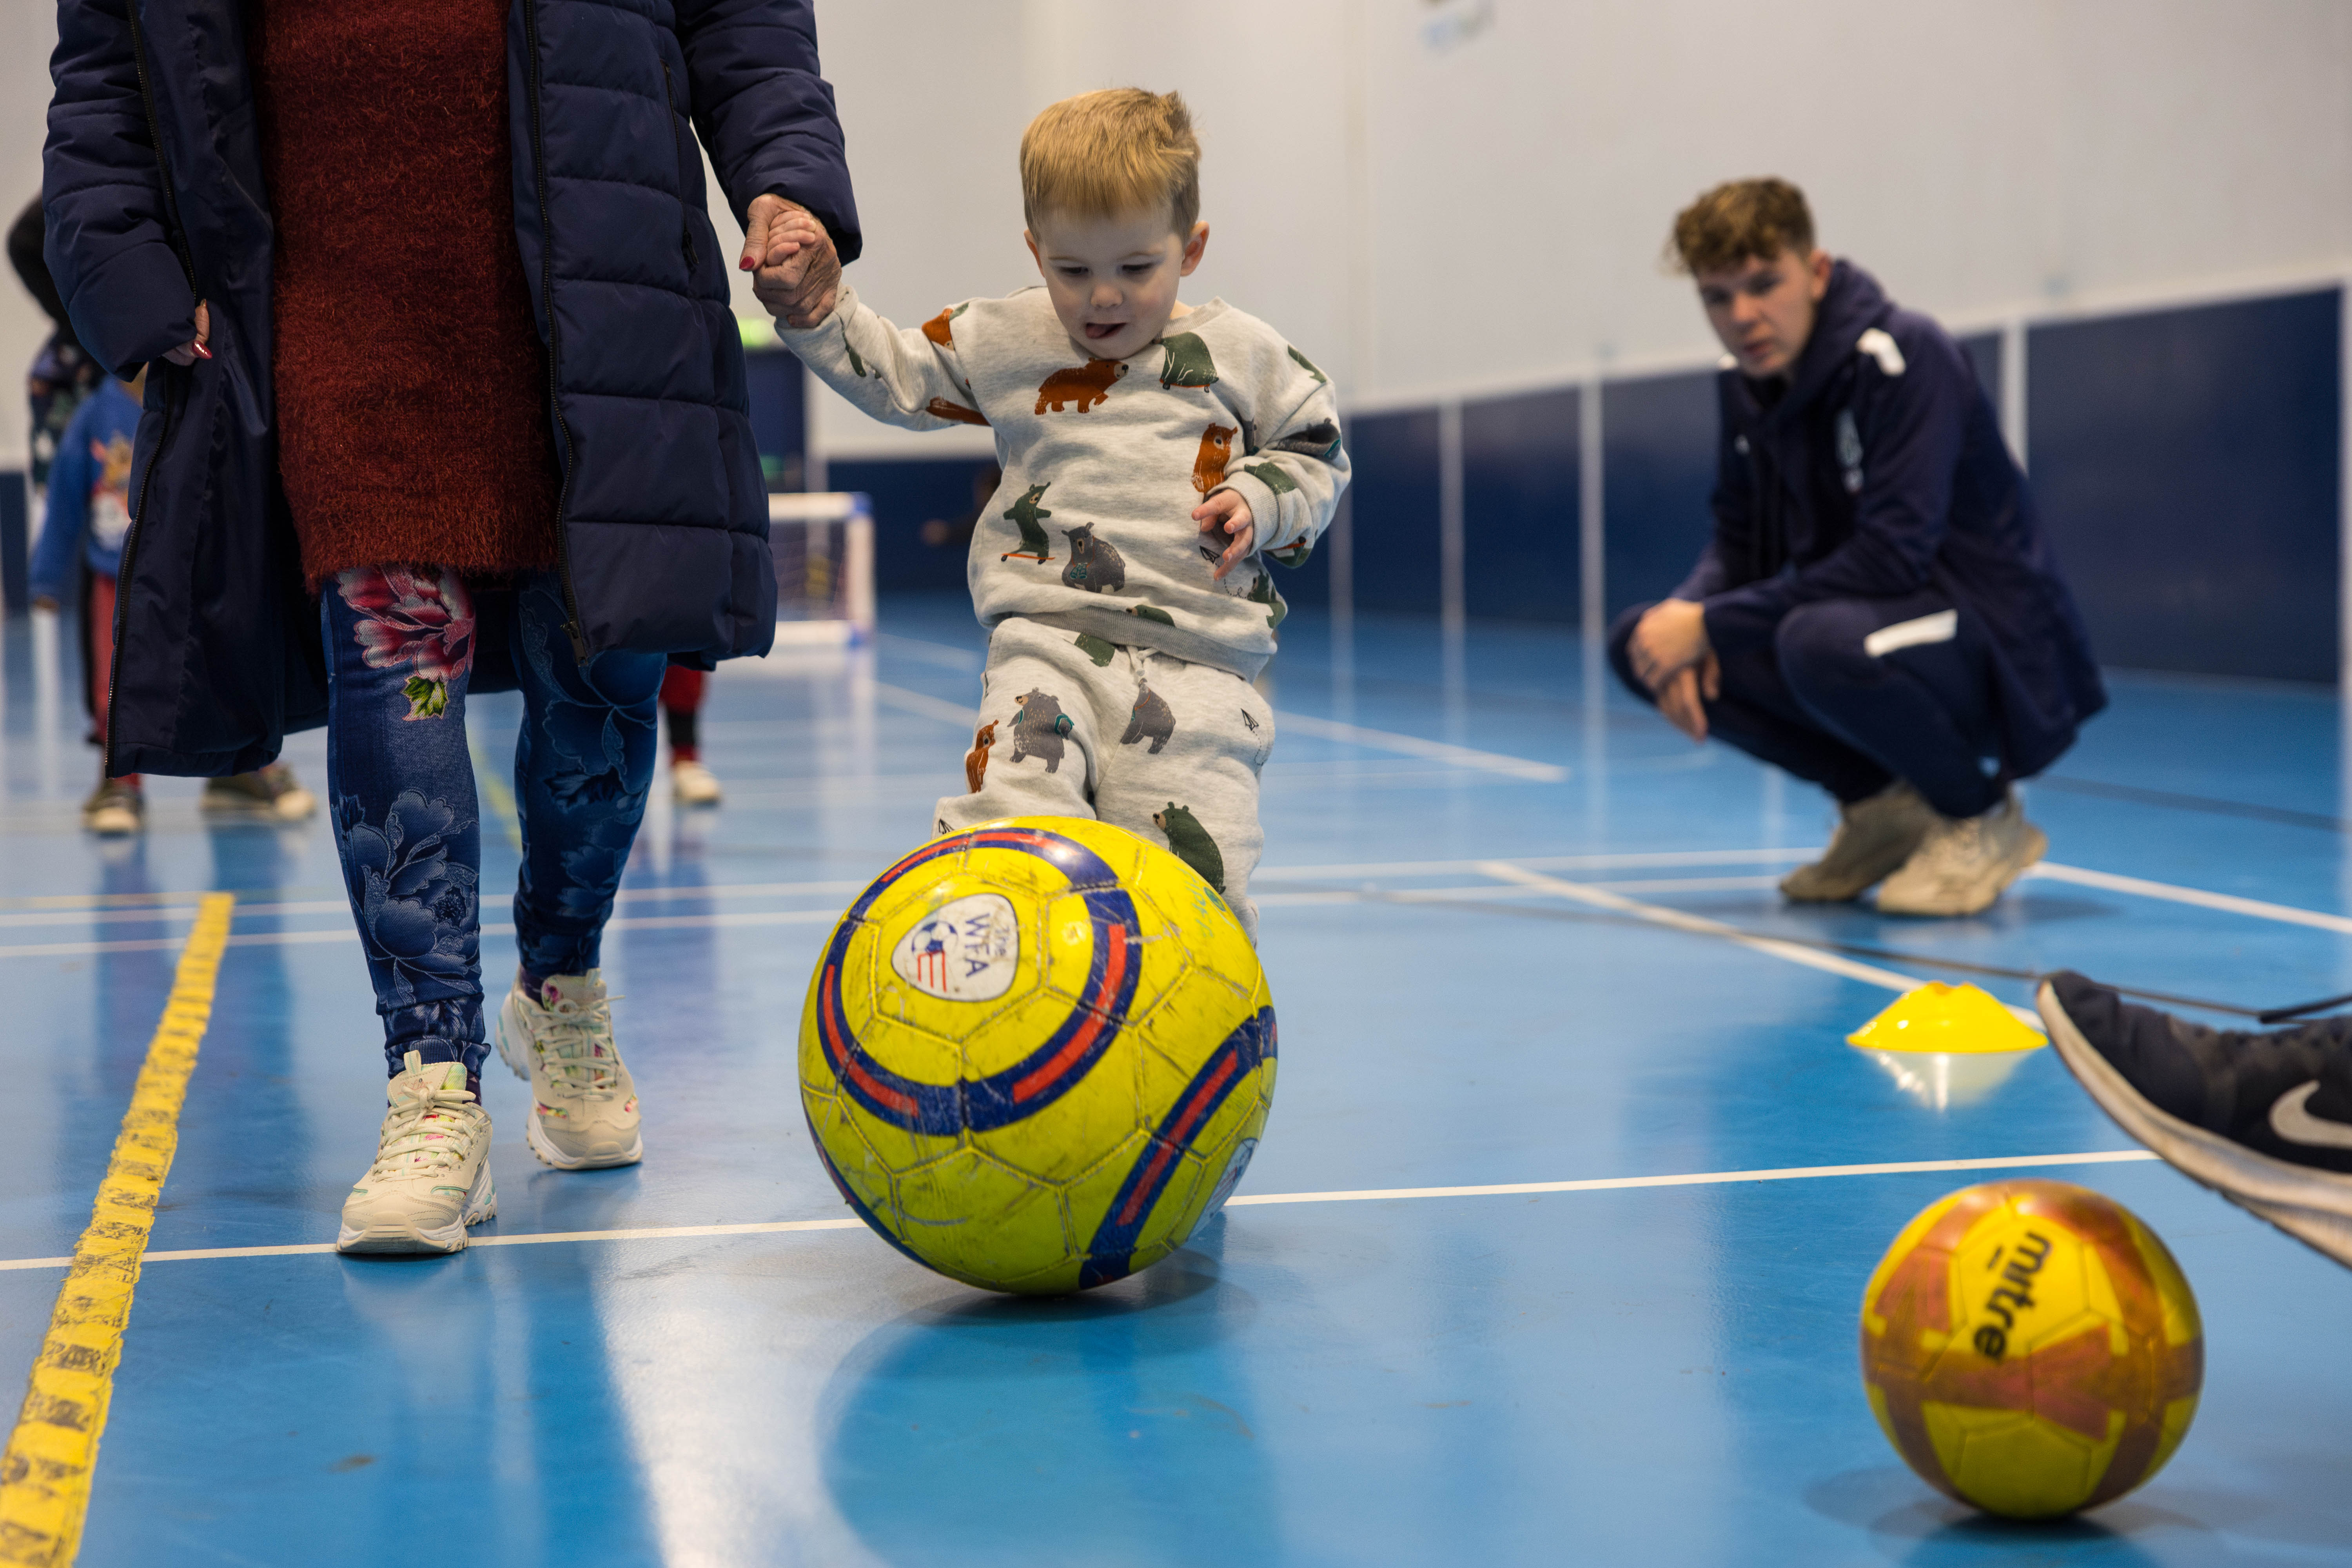 Mini Baggies participant kicking a ball while being coached by a TAF coach